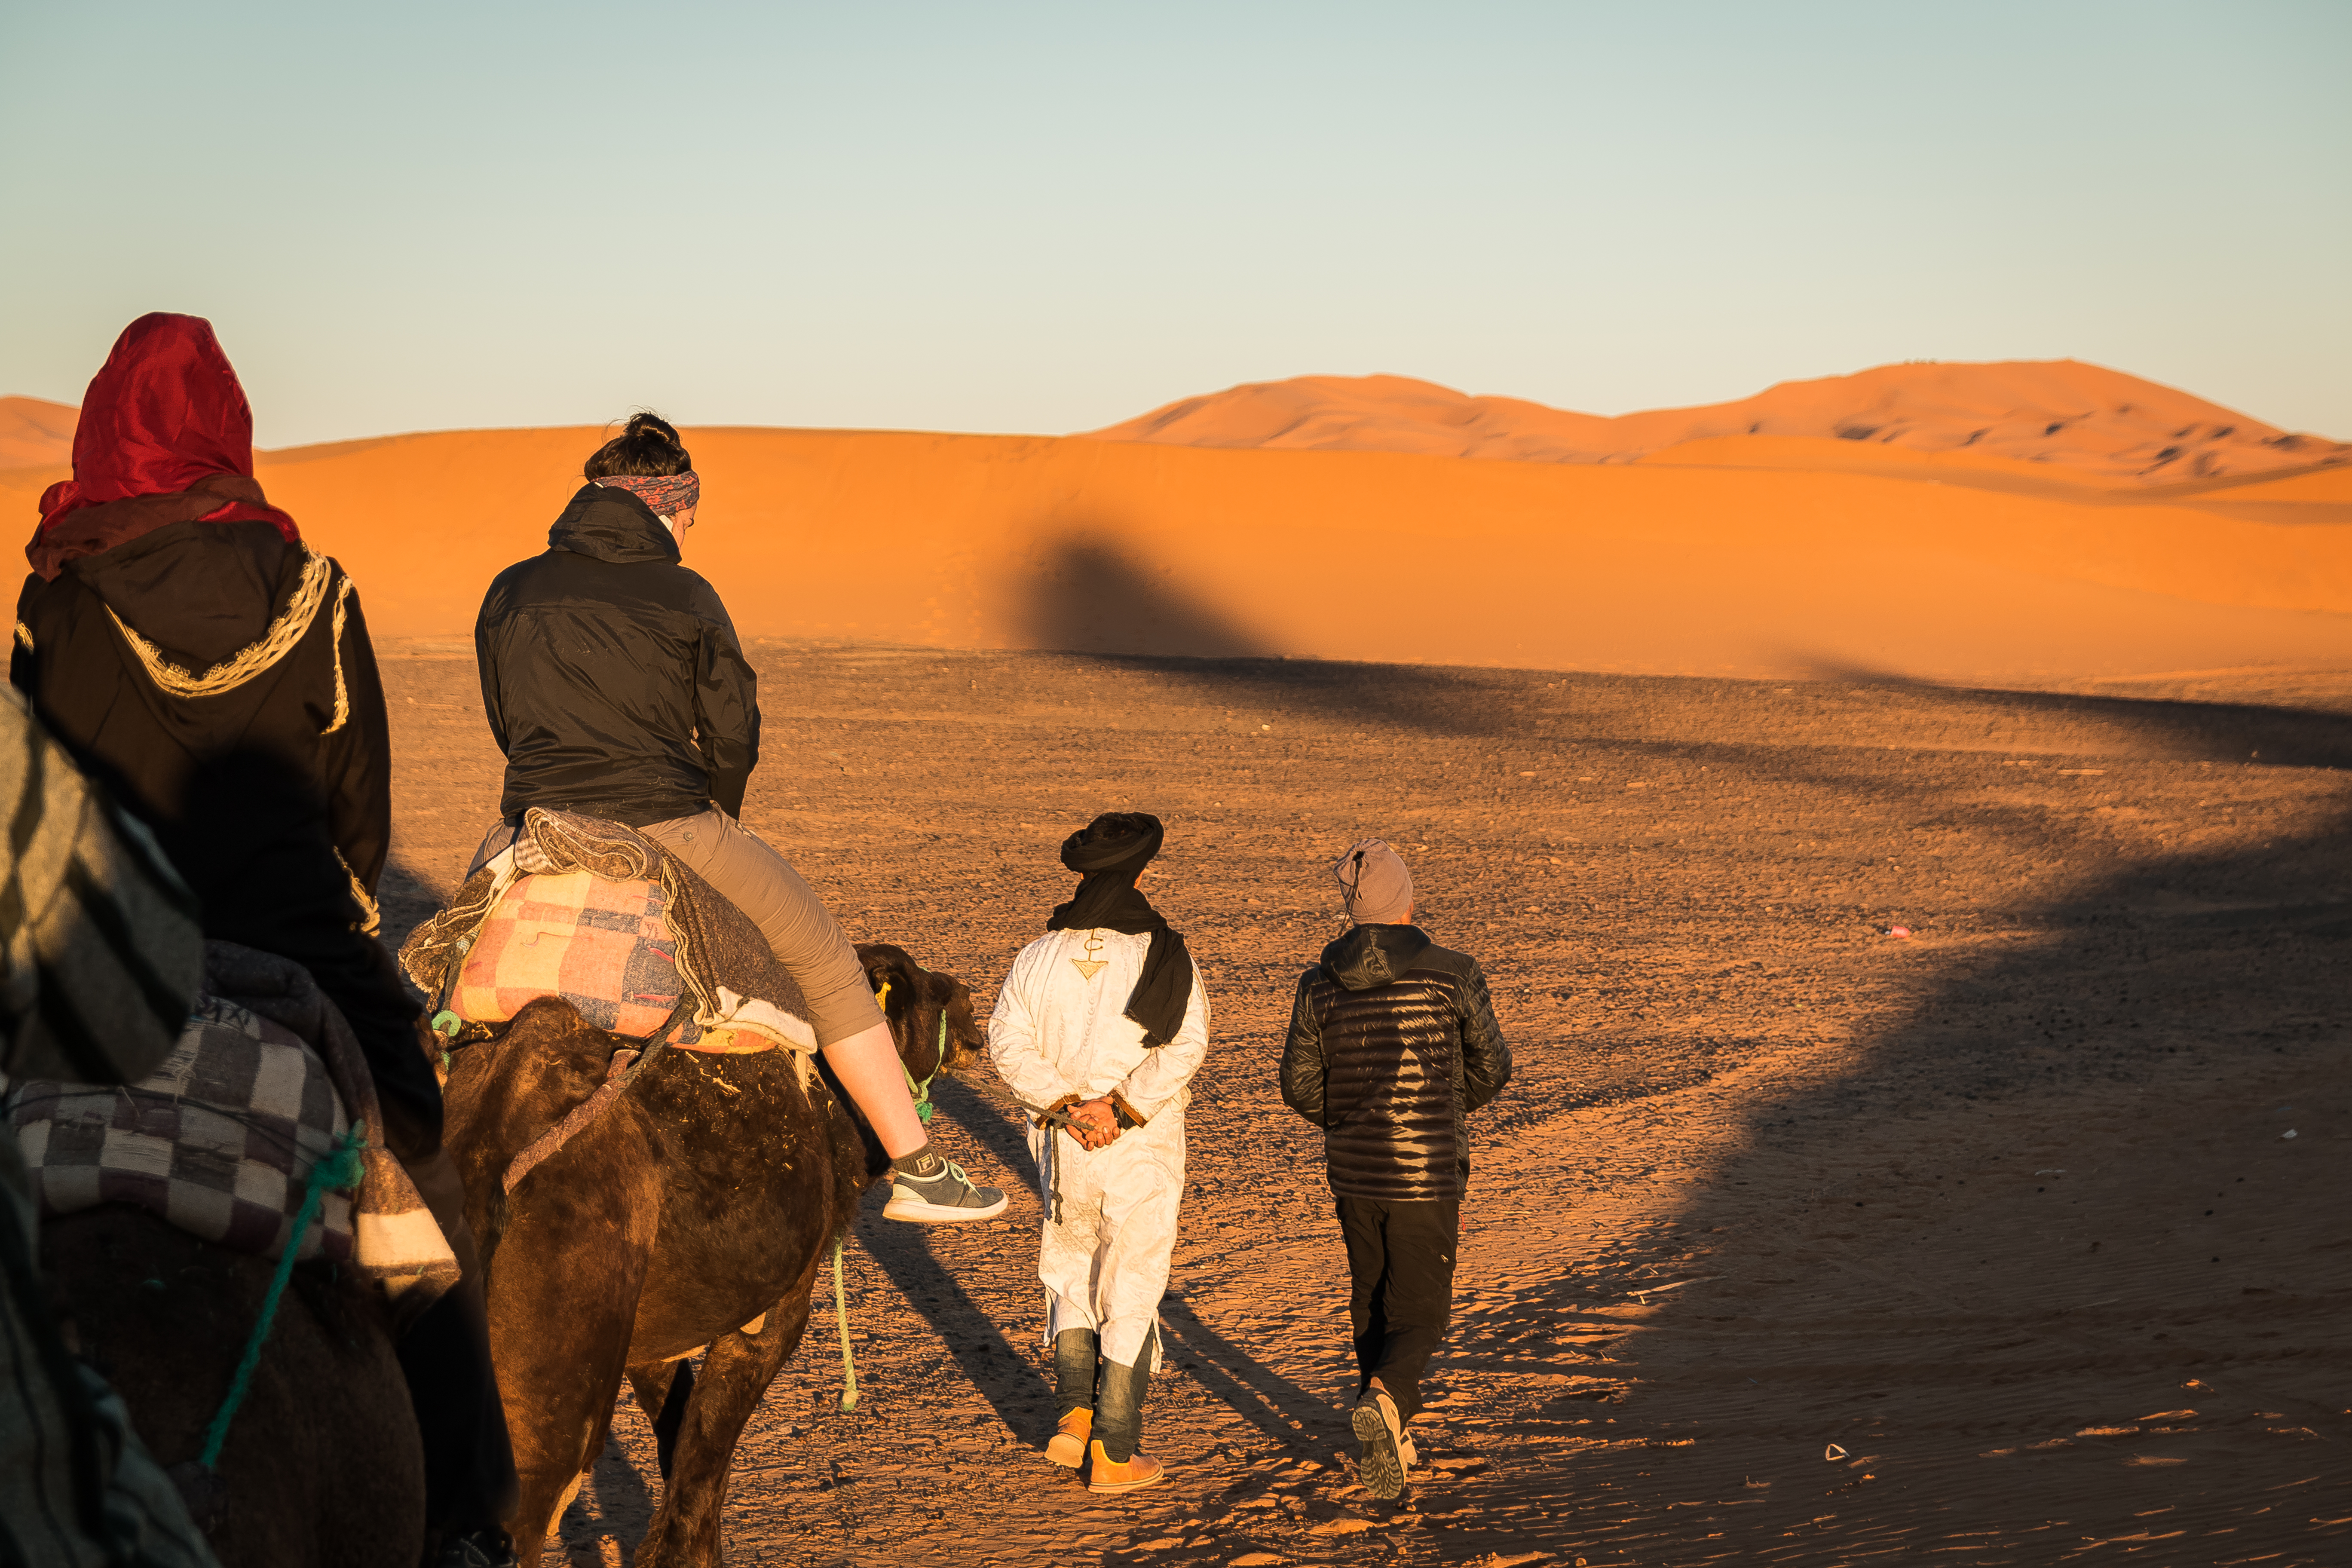 Riding Camels in Morocco | Our Night in the Sahara